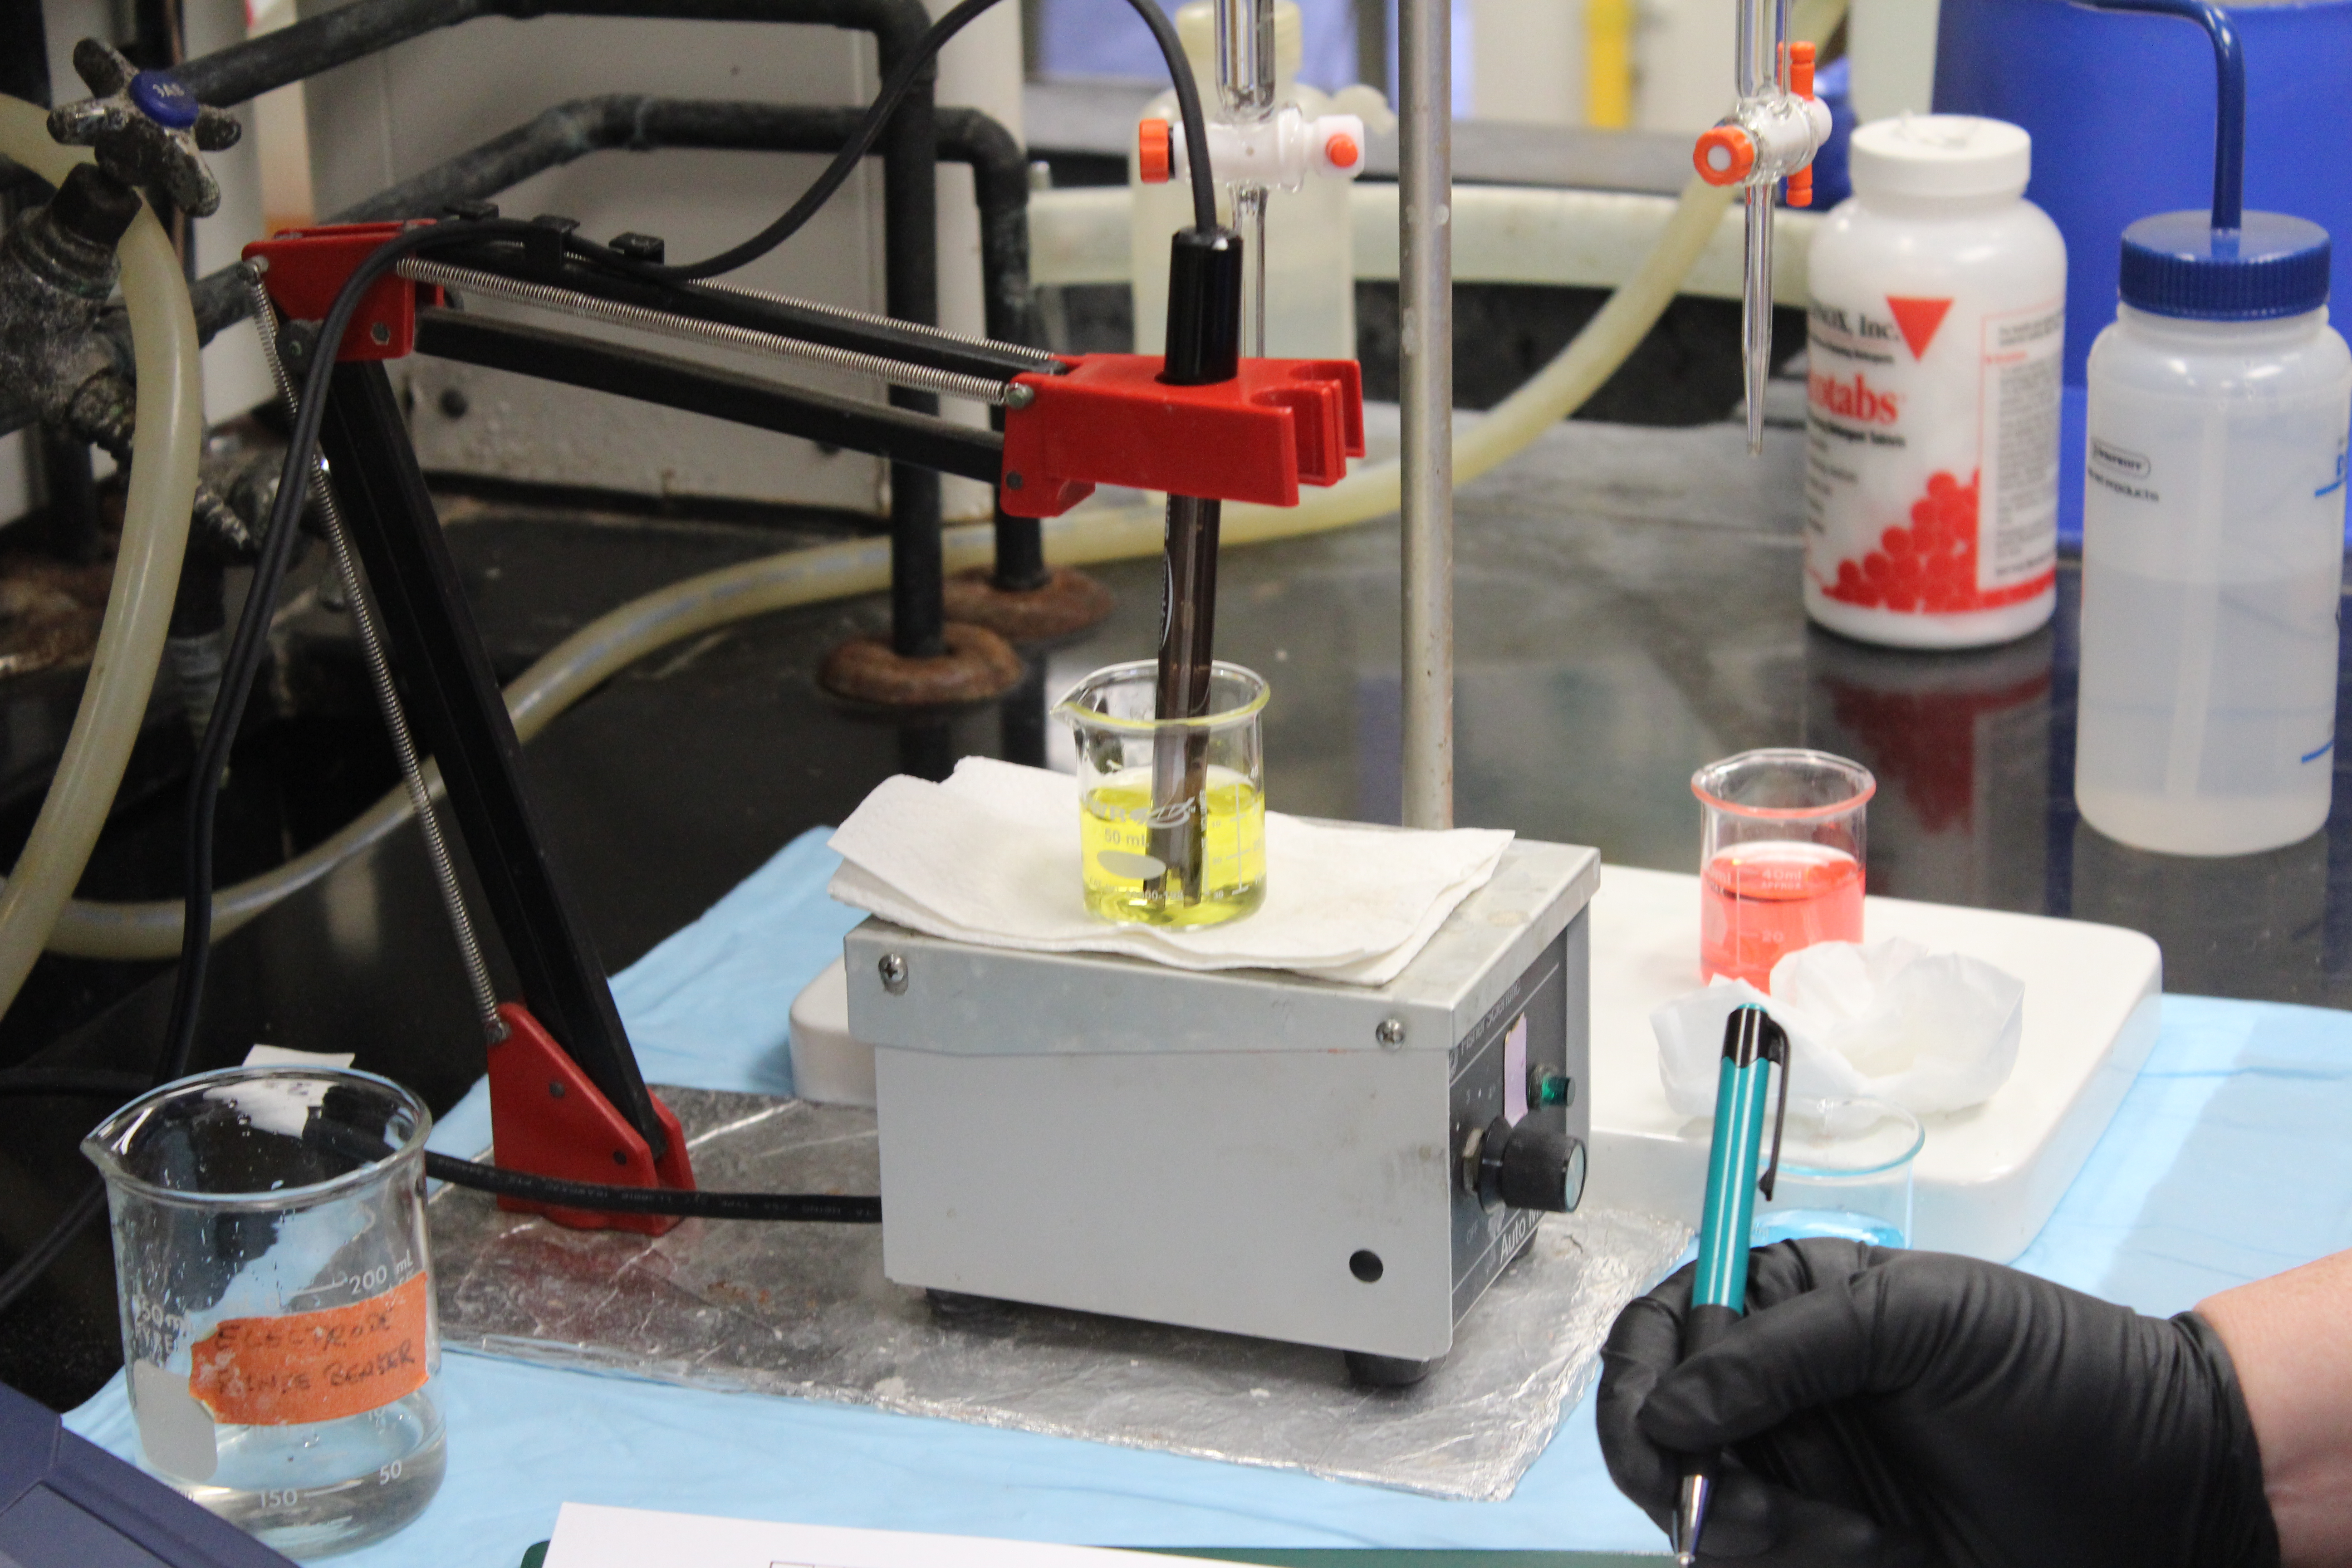 the wastewater analysis lab testing a yellow fluid in a beaker